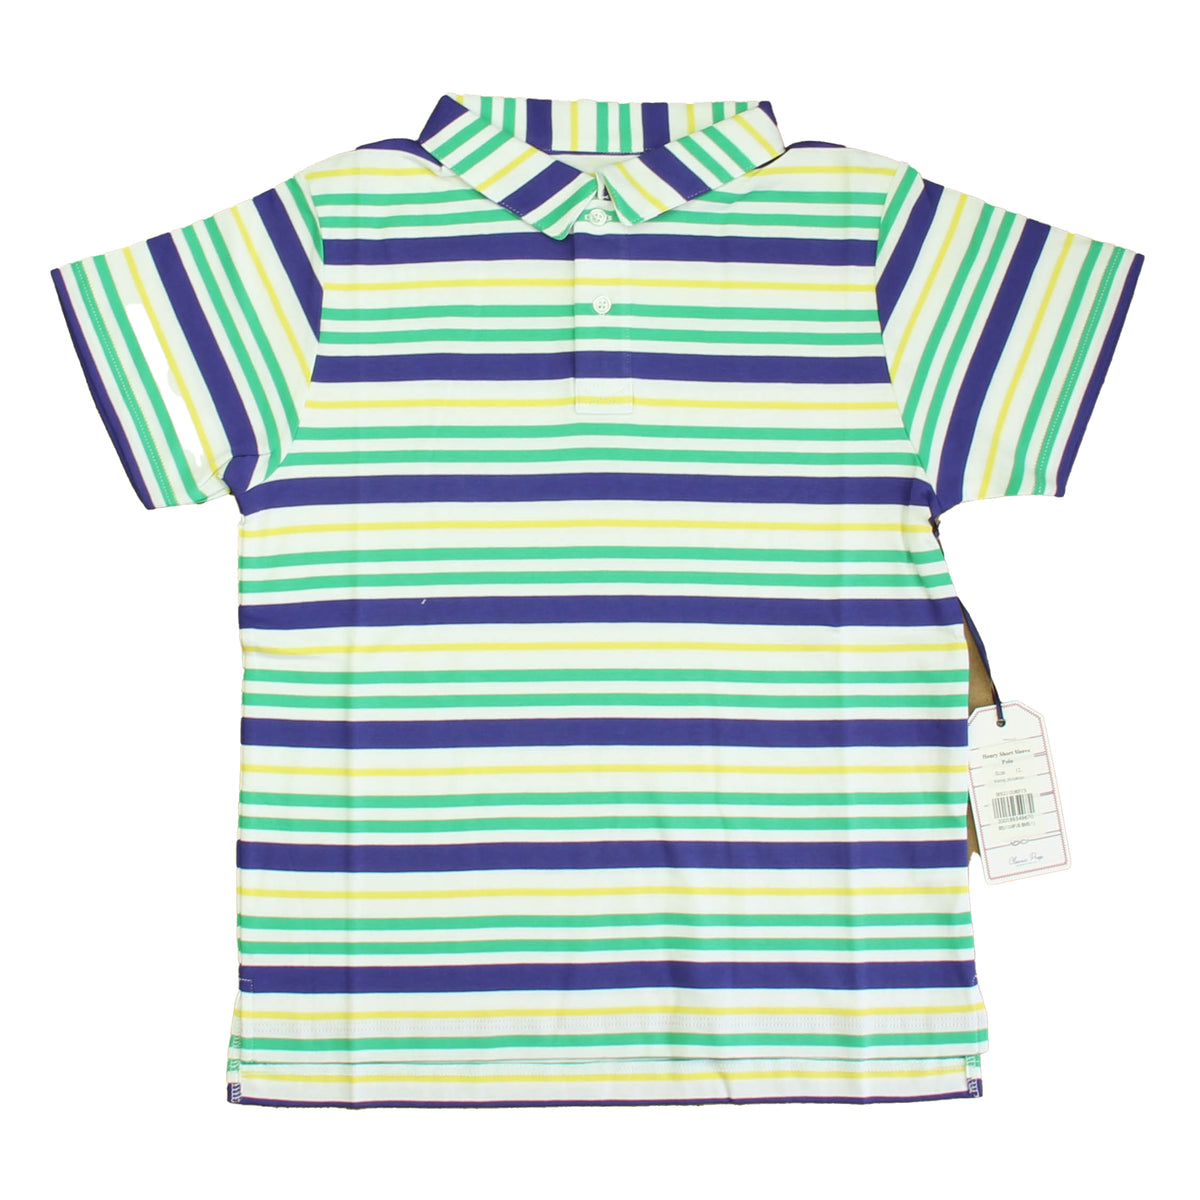 New with Tags: Blarney Multistripe Top -- FINAL SALE